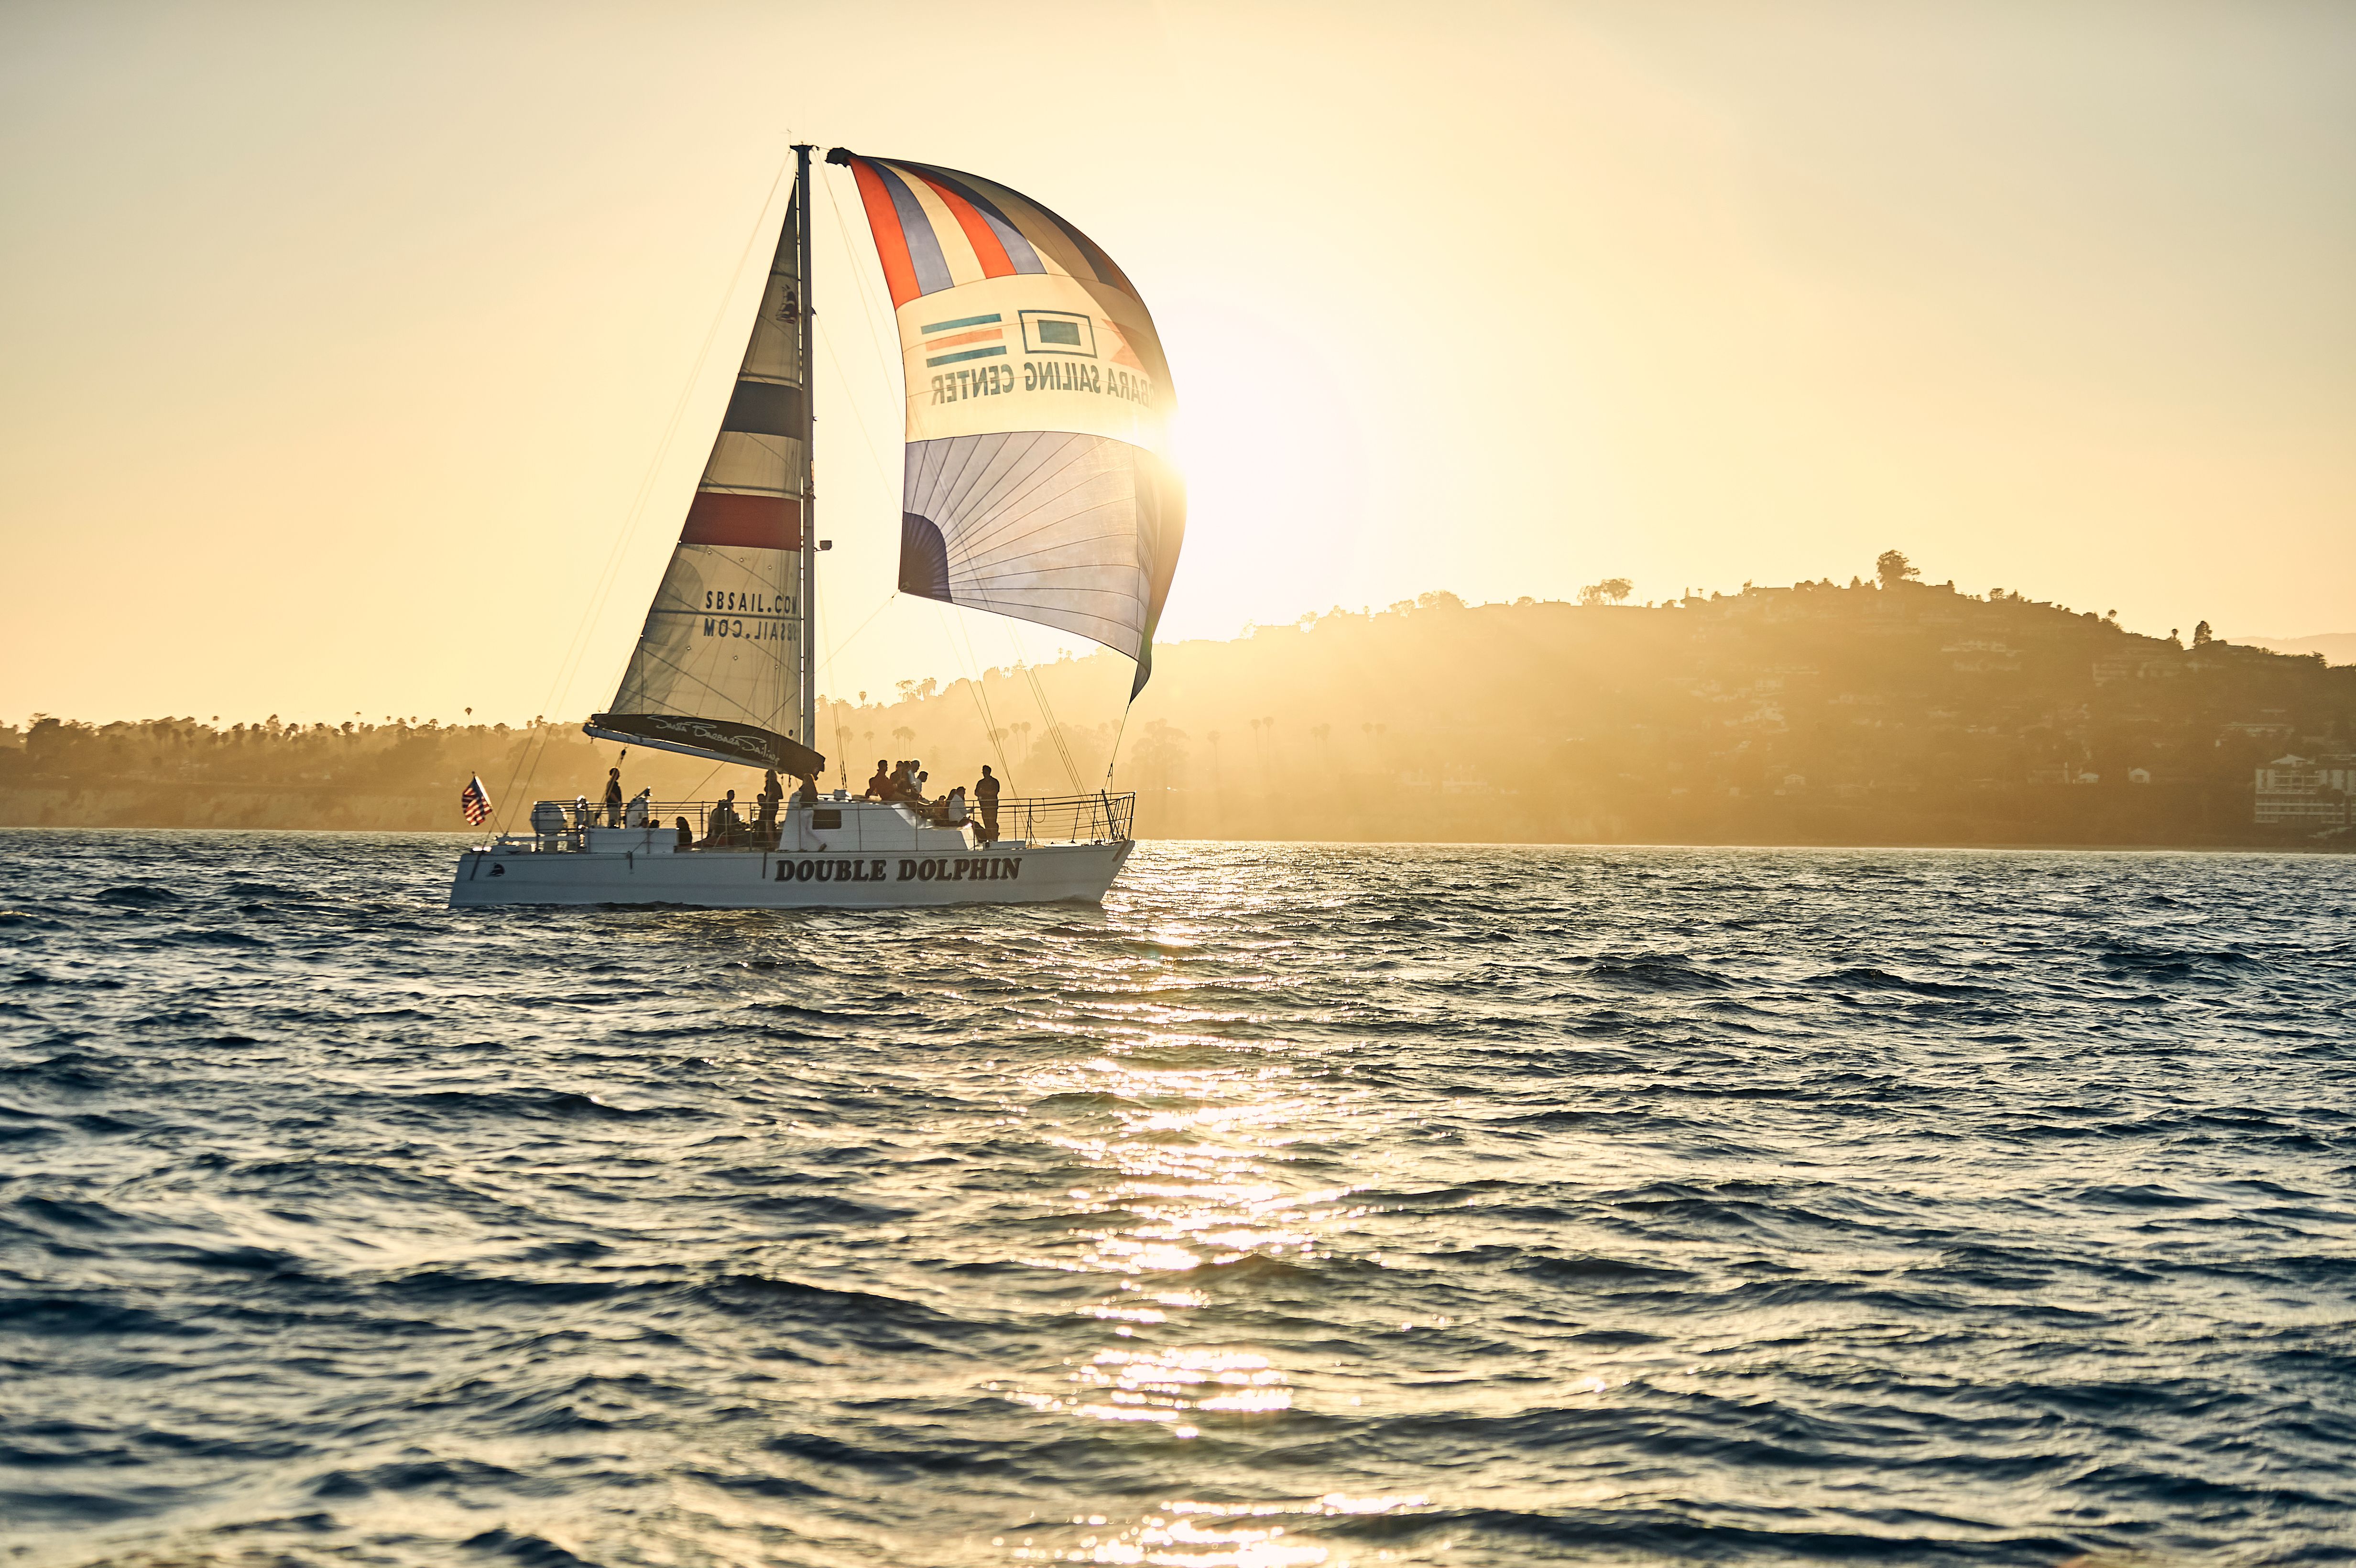 A sunset sail in the Santa Barbara Harbor, with silvery glistening water and an island in the background